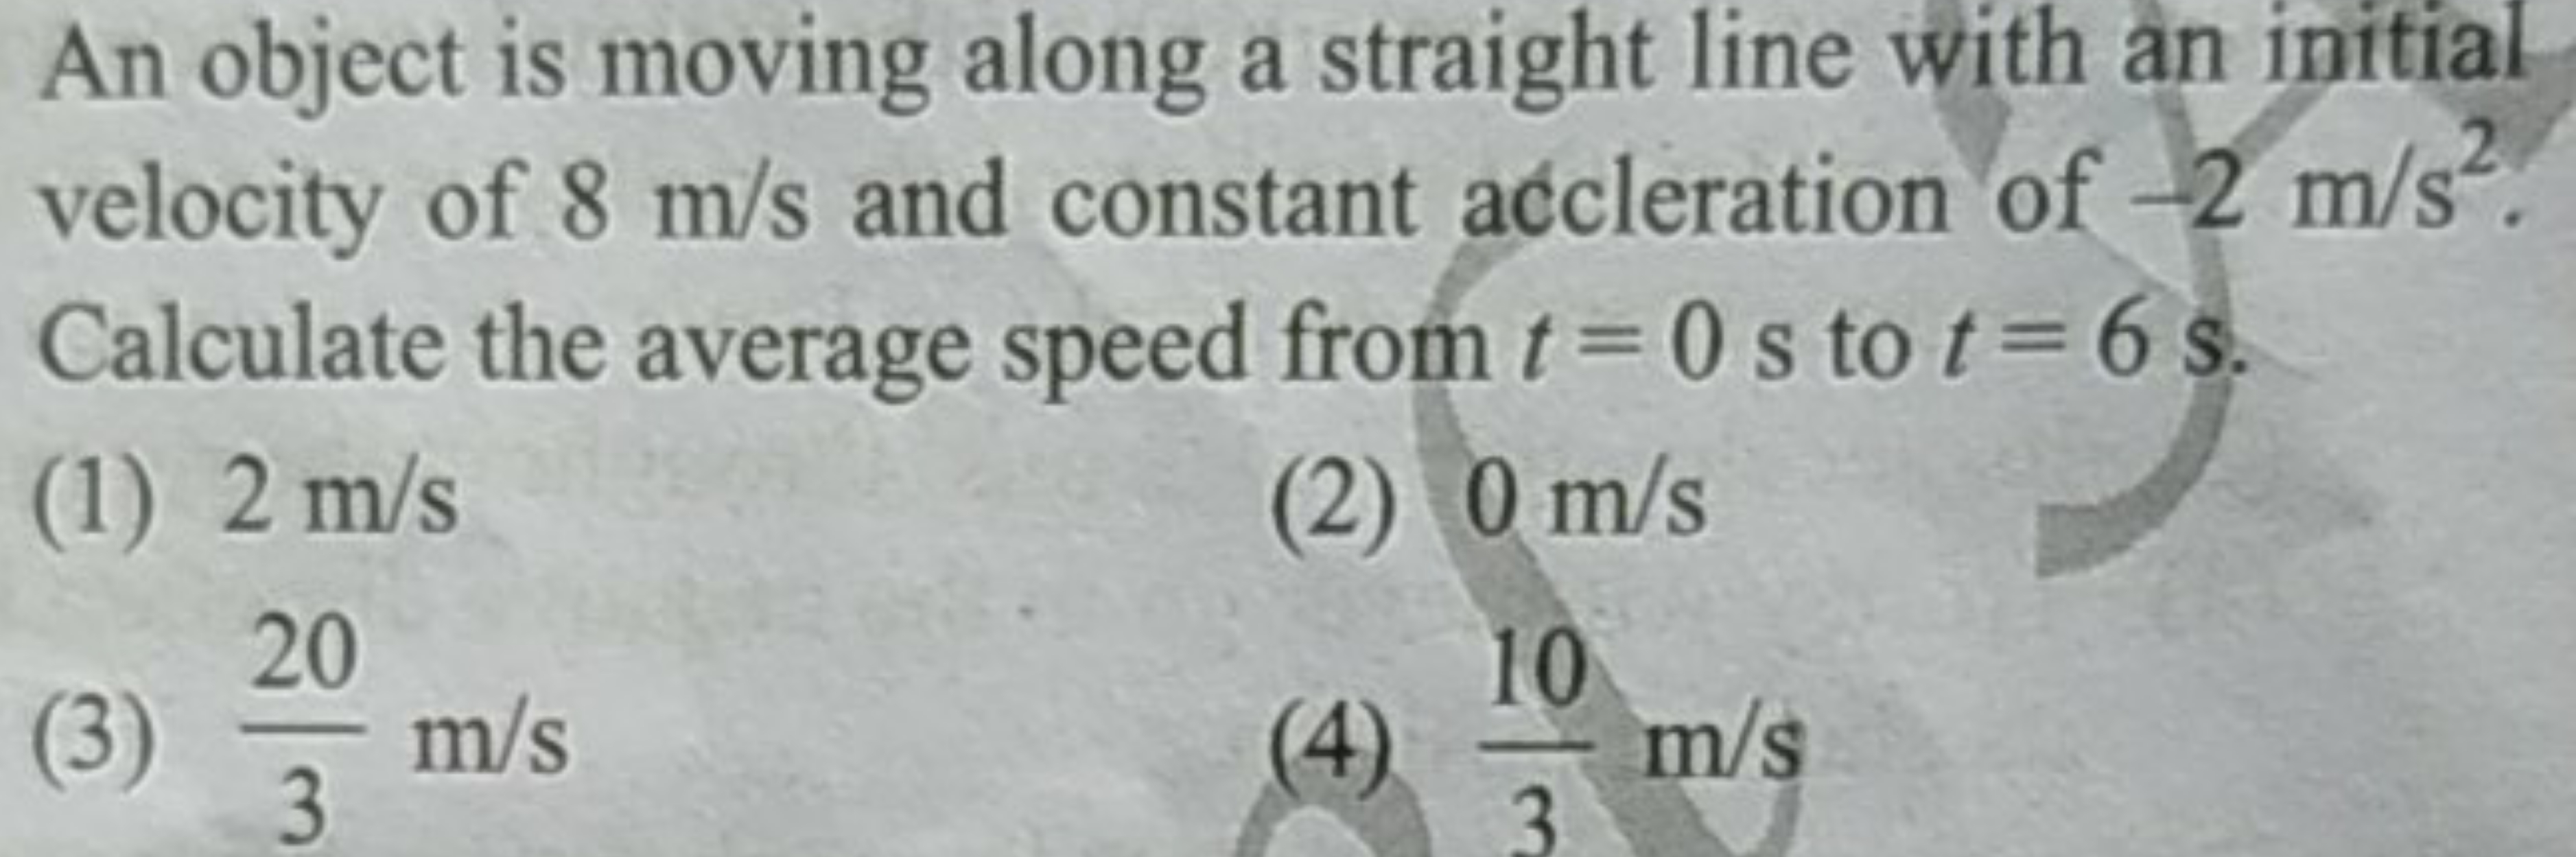 An object is moving along a straight line with an initial velocity of 